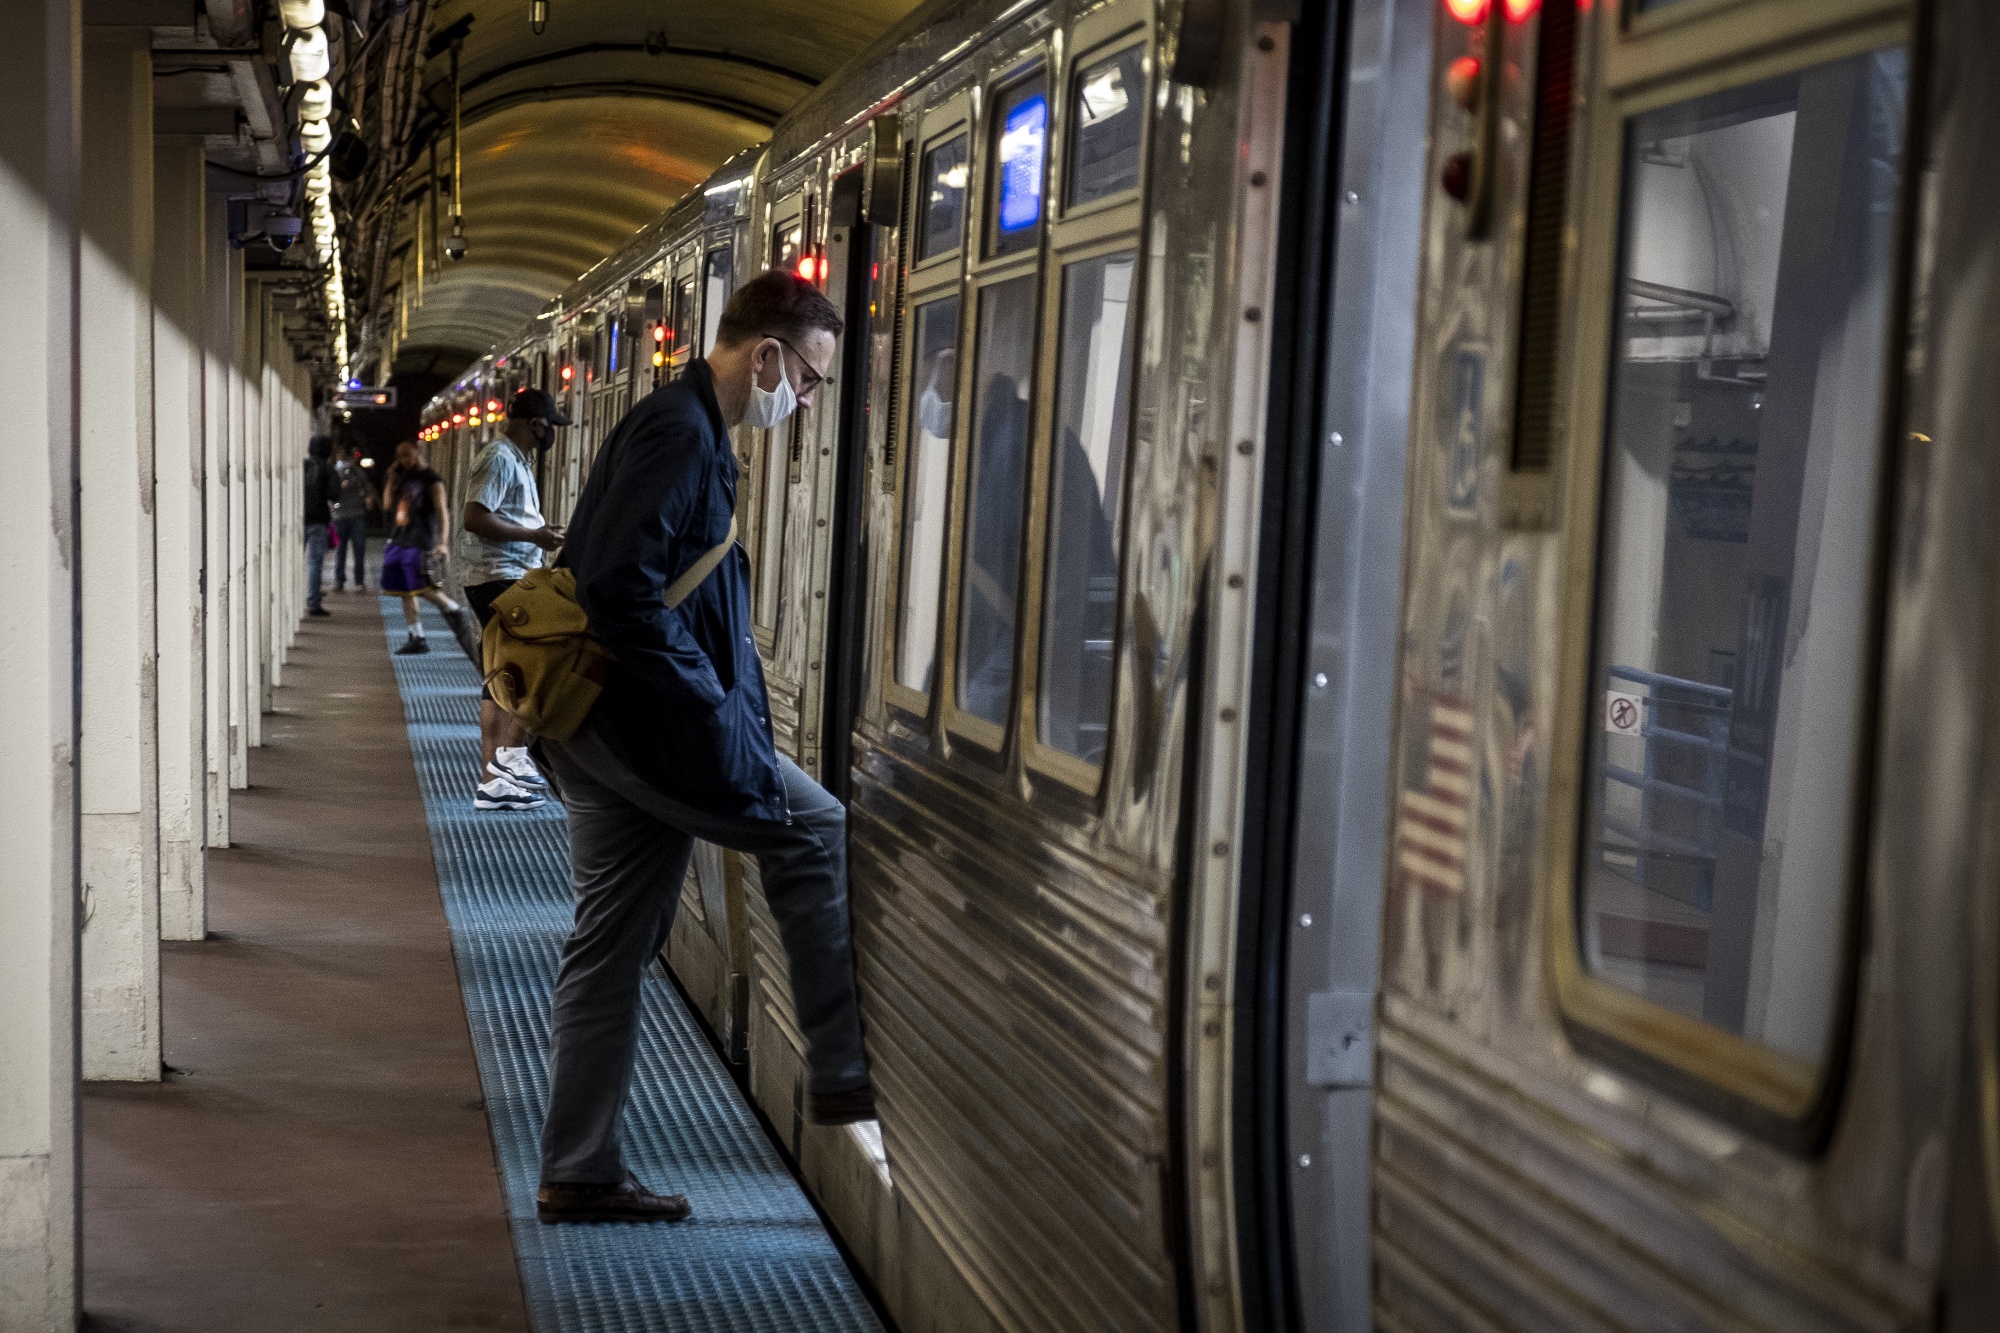 A commuter boards a Chicago Transit Authority train on June 3.